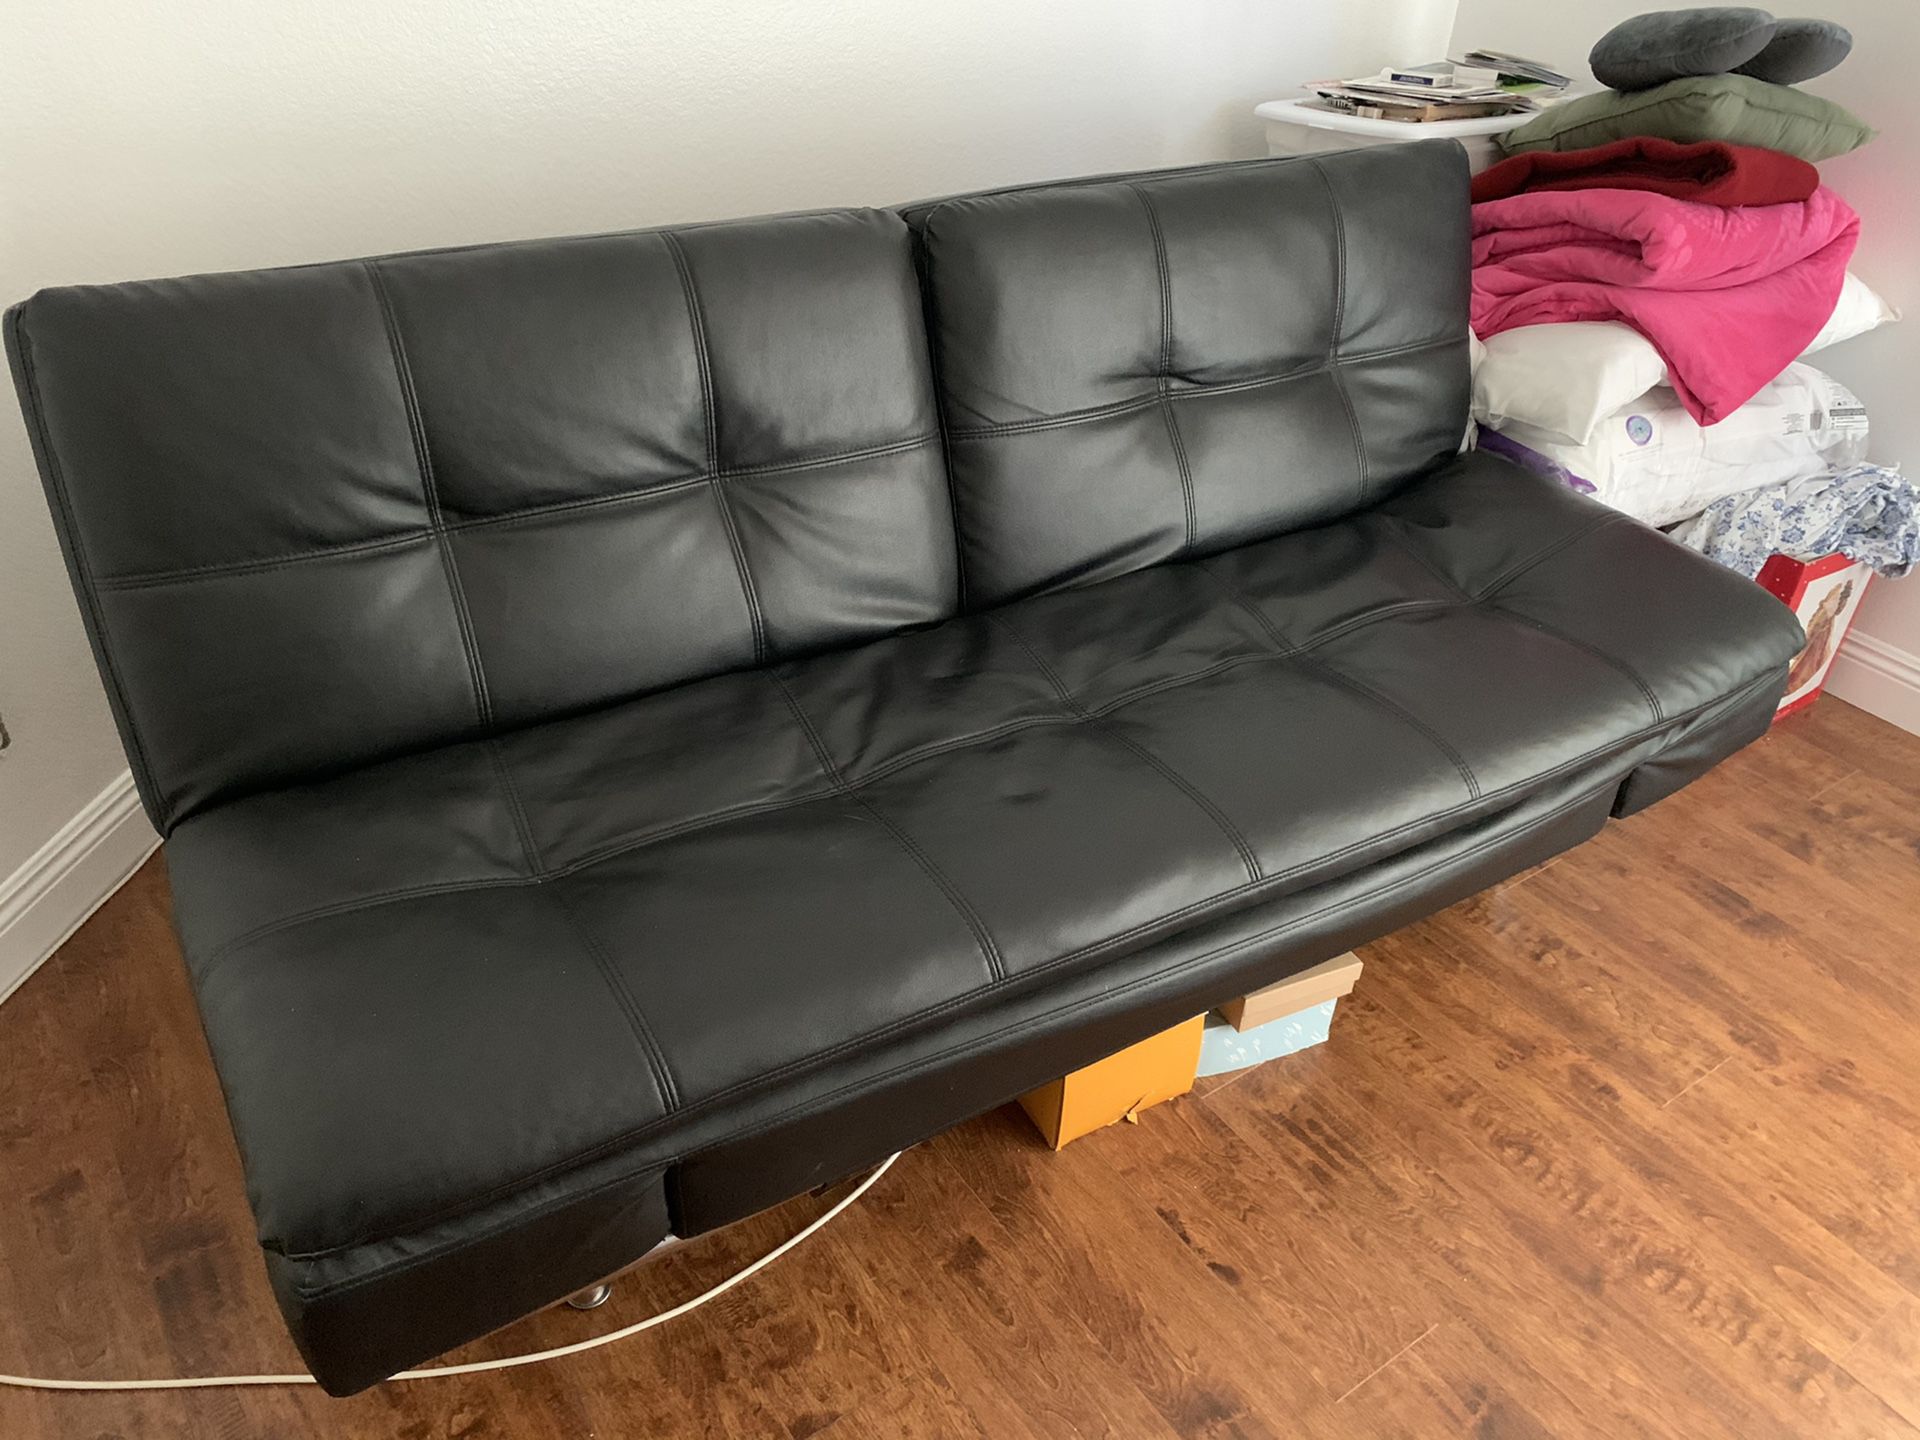 Black leather Futon opens up to a full size